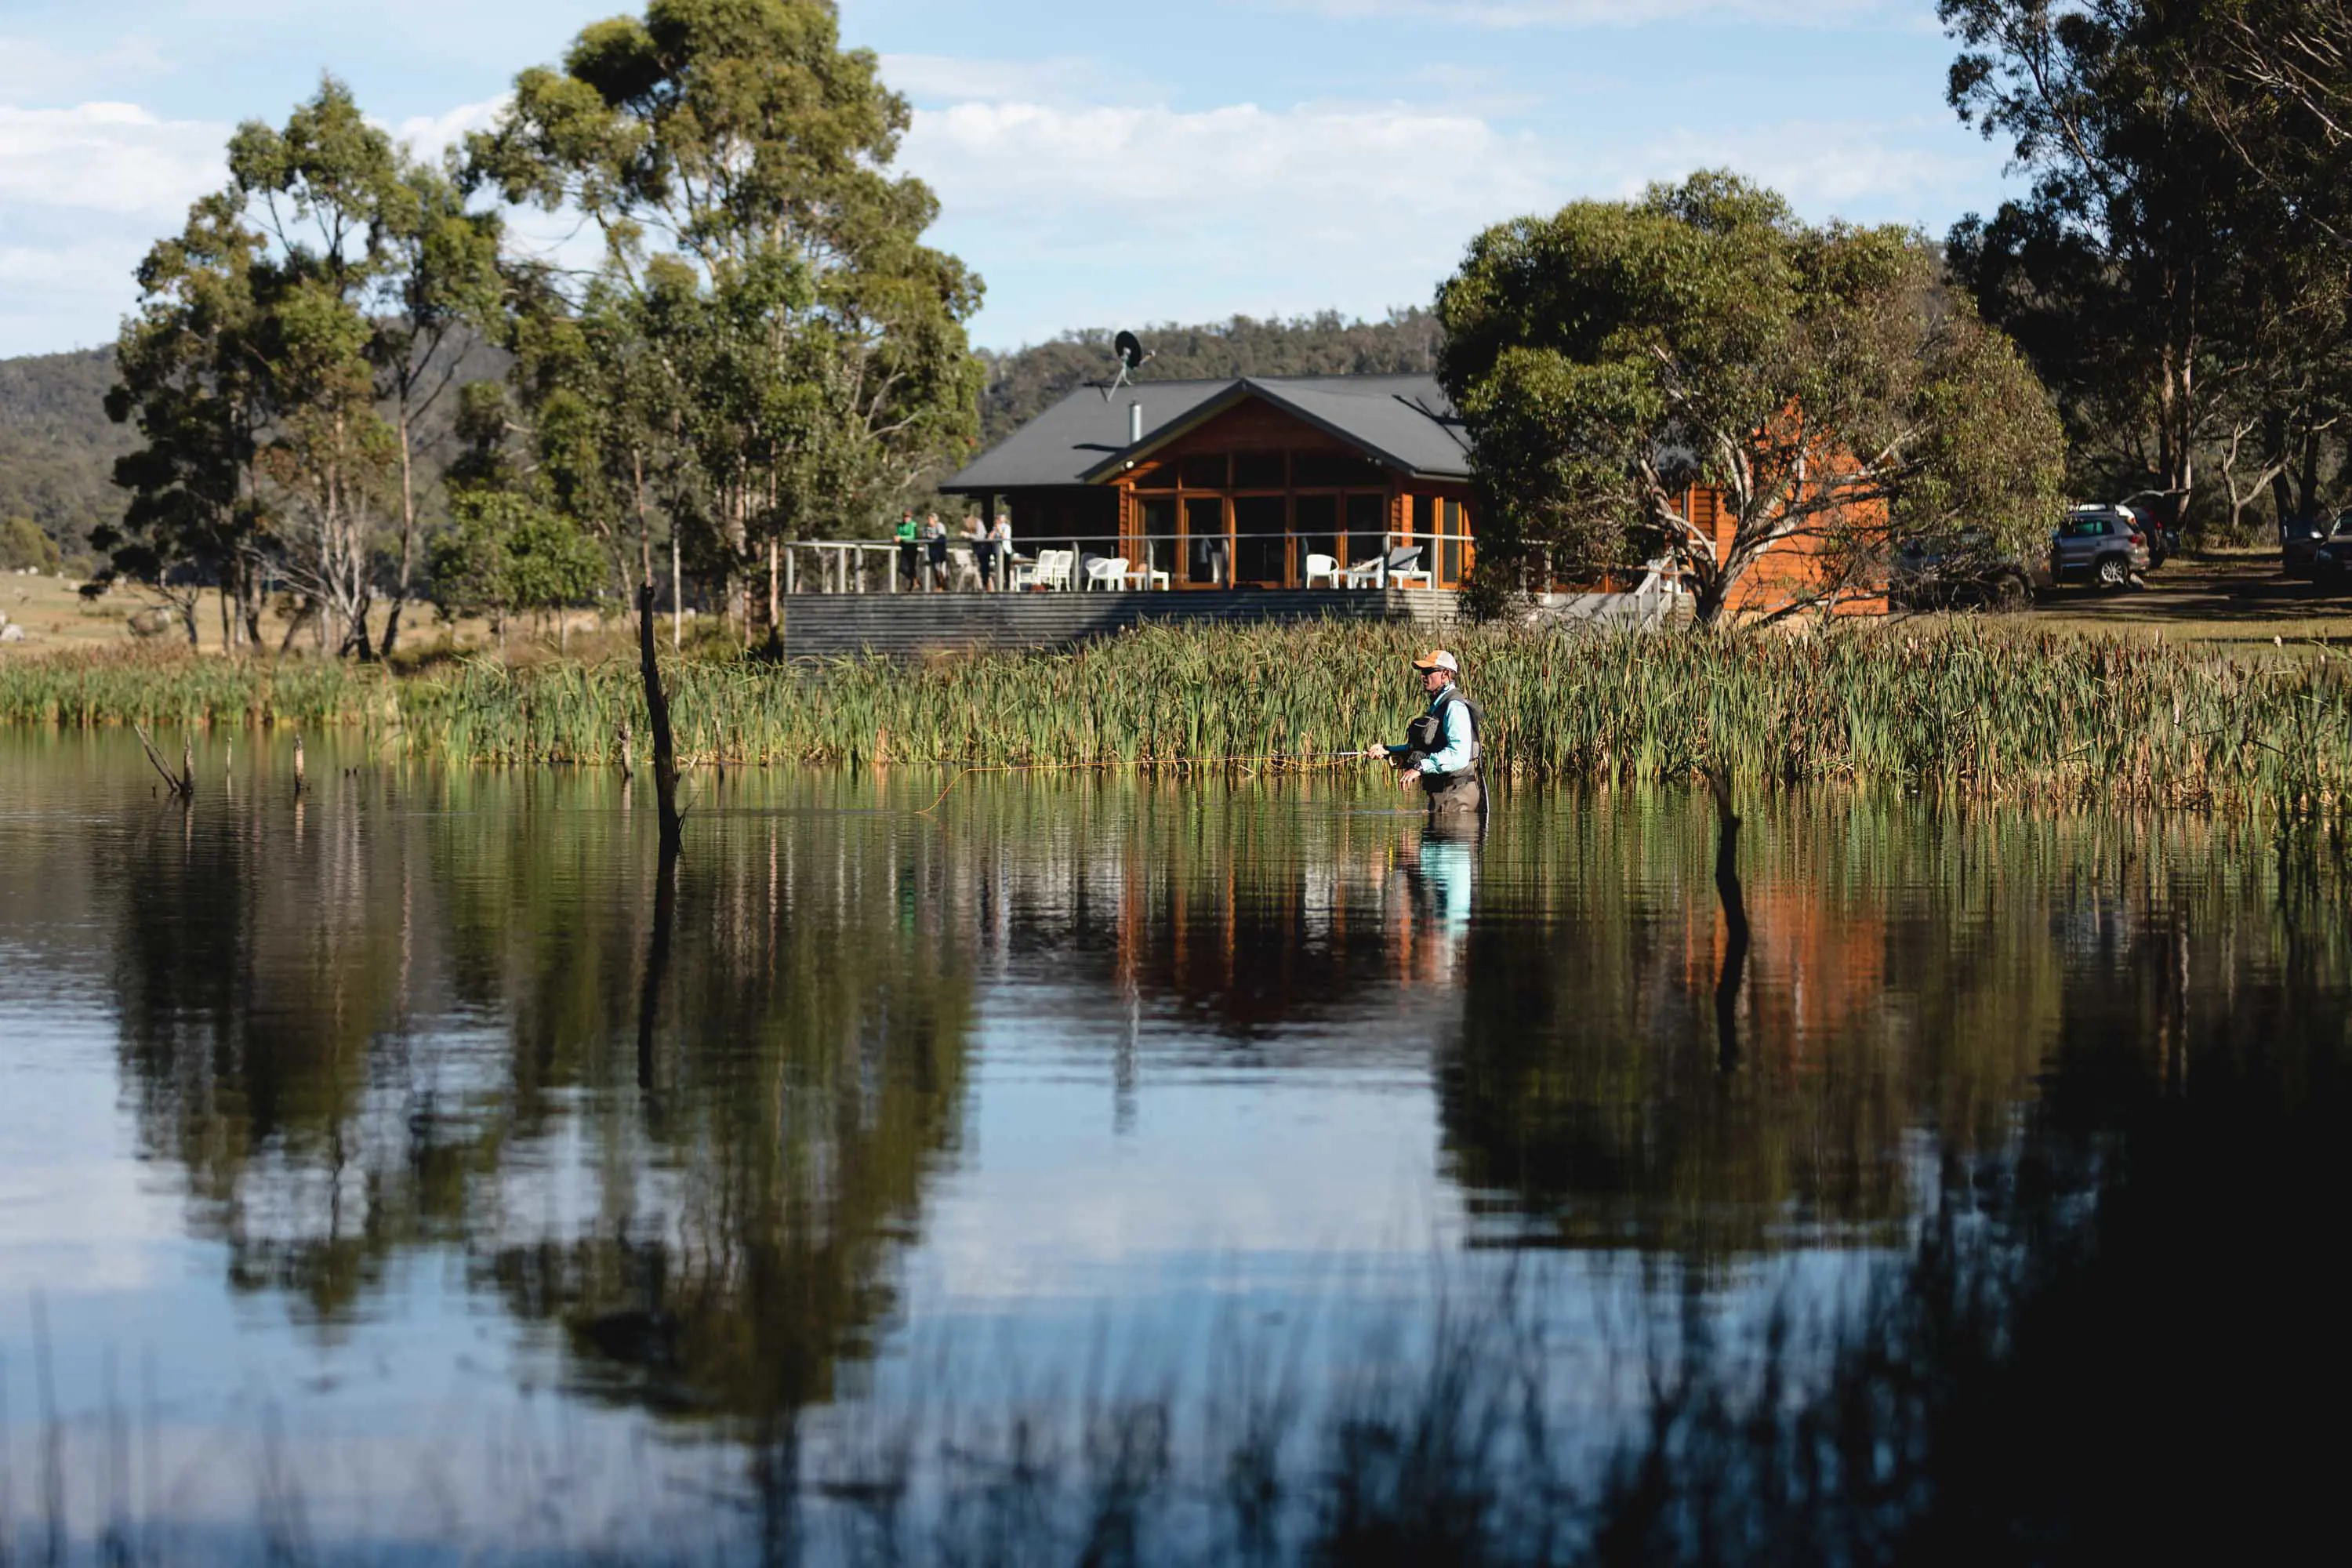 A man stands up to his waist in stilll waters fishing, with reeds and wooden house in the background.